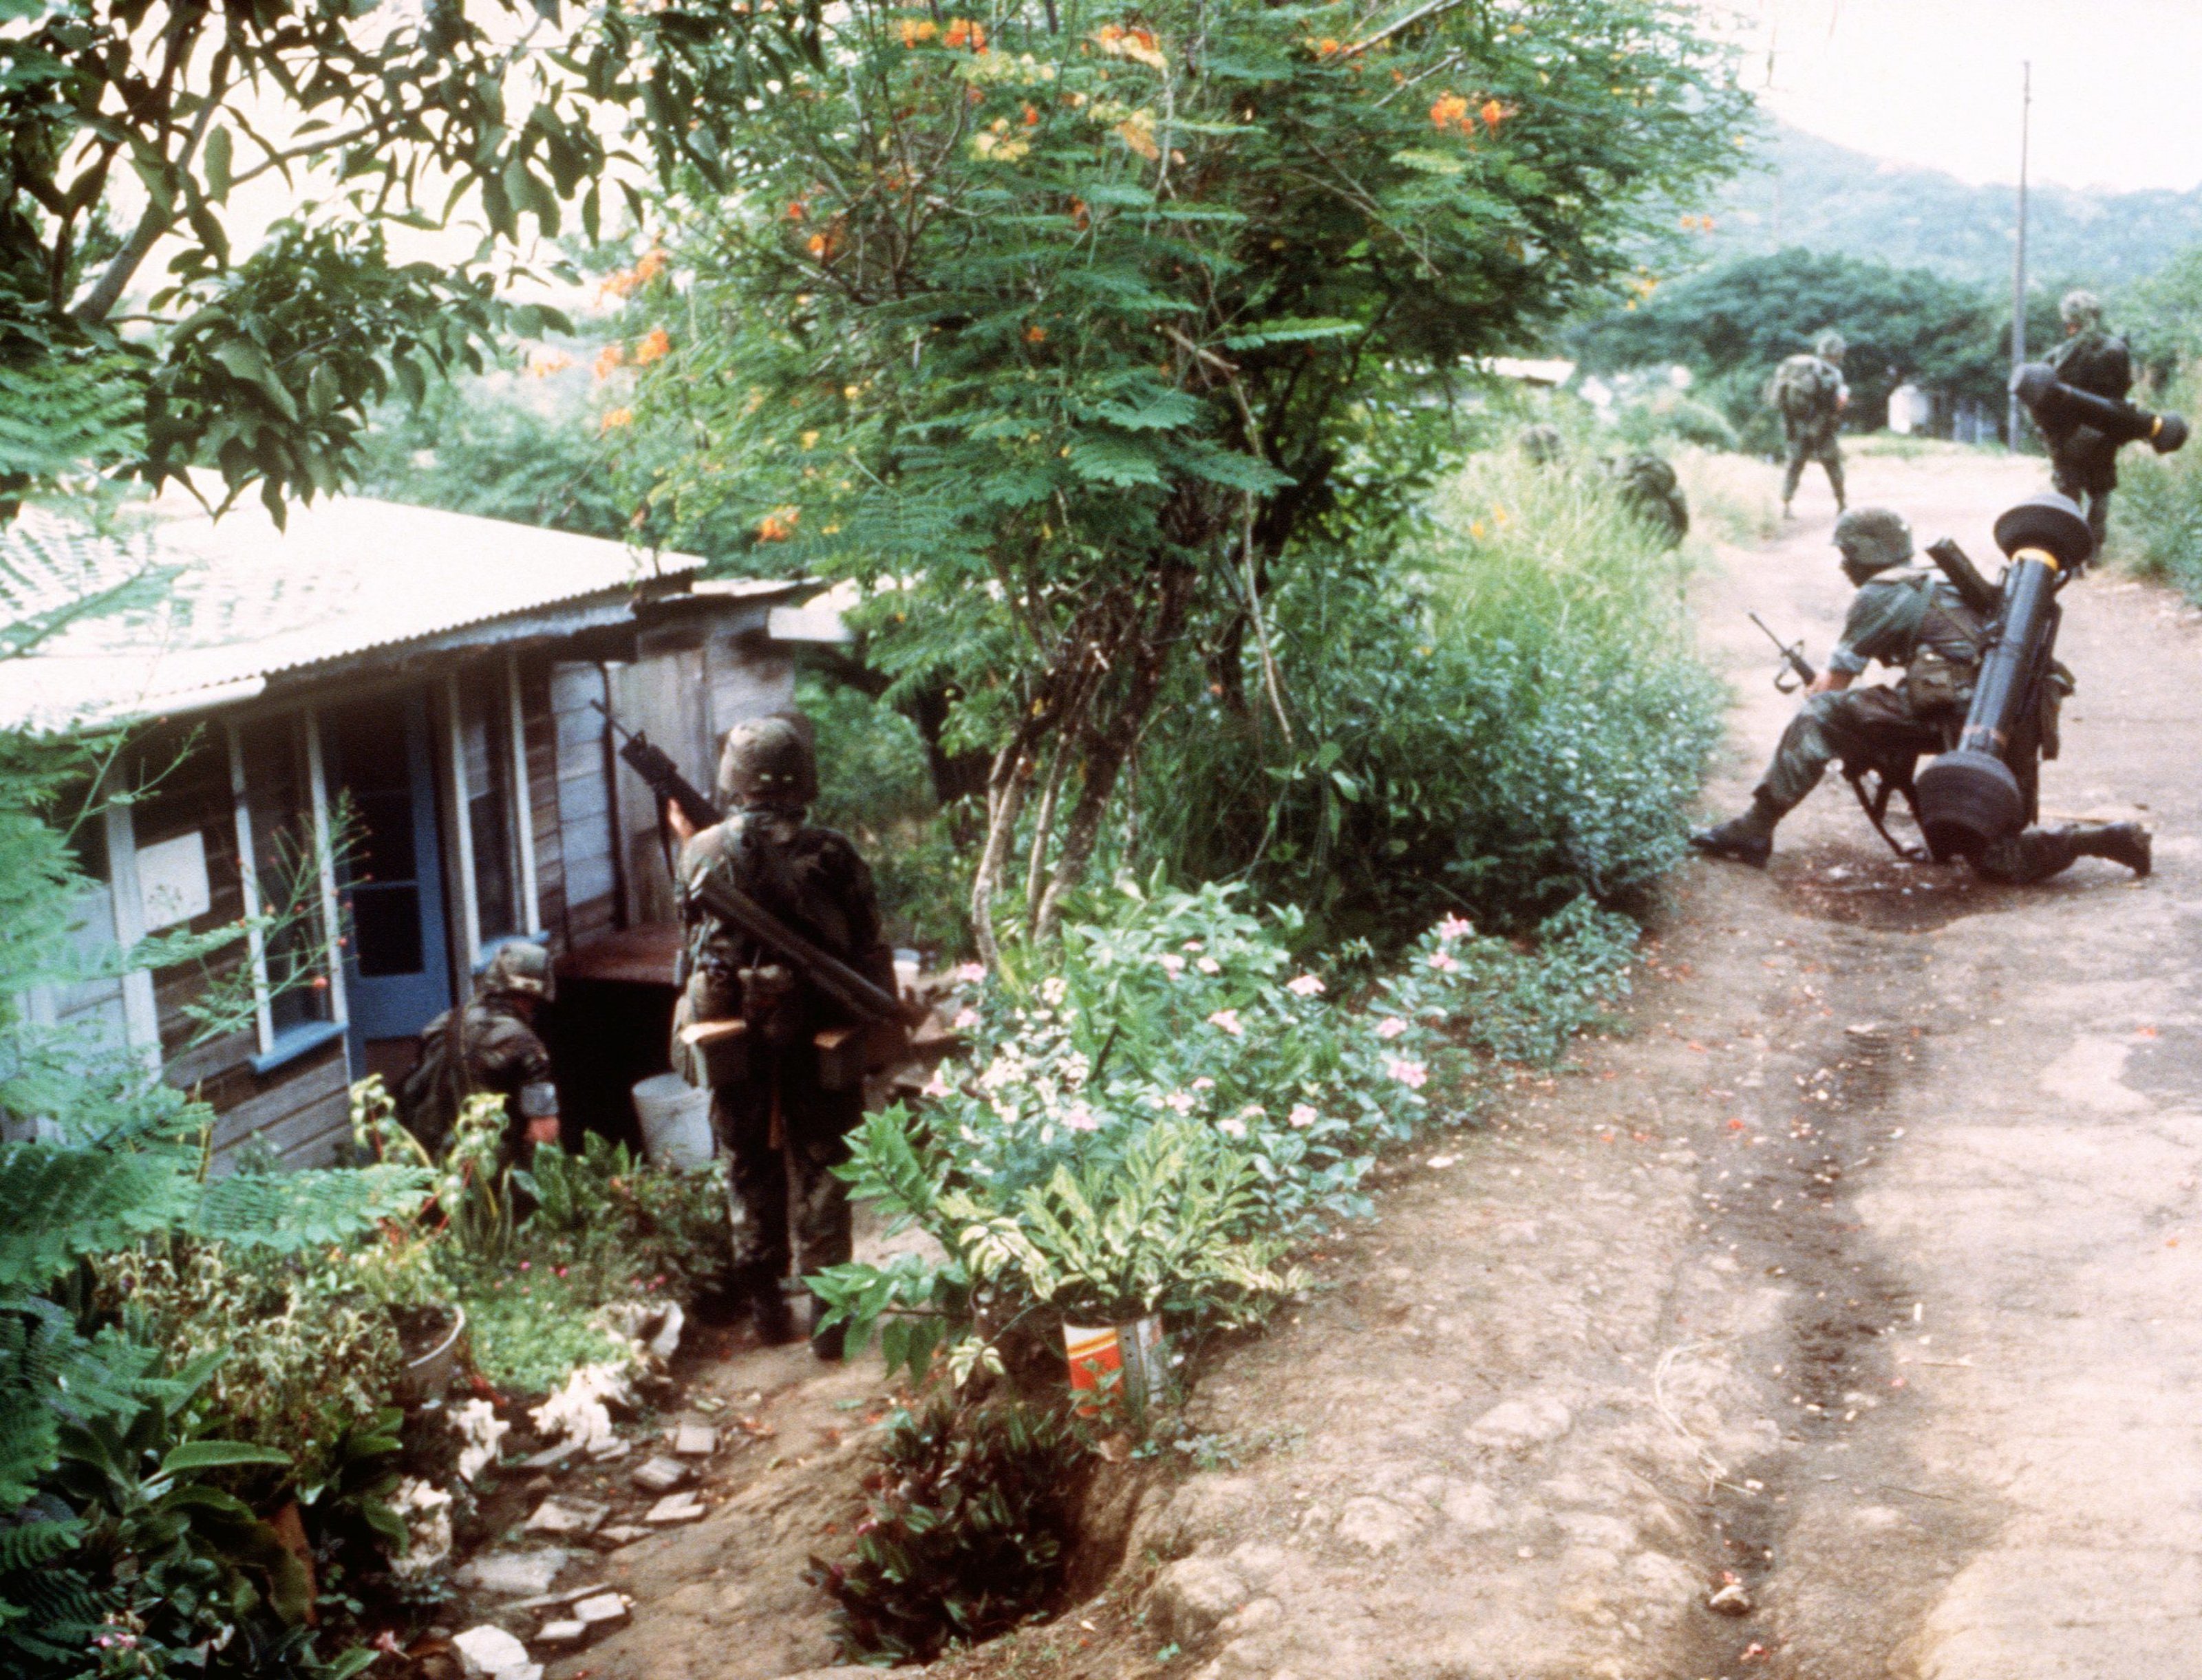 82nd Airborne soldiers on Grenada dating to 1983